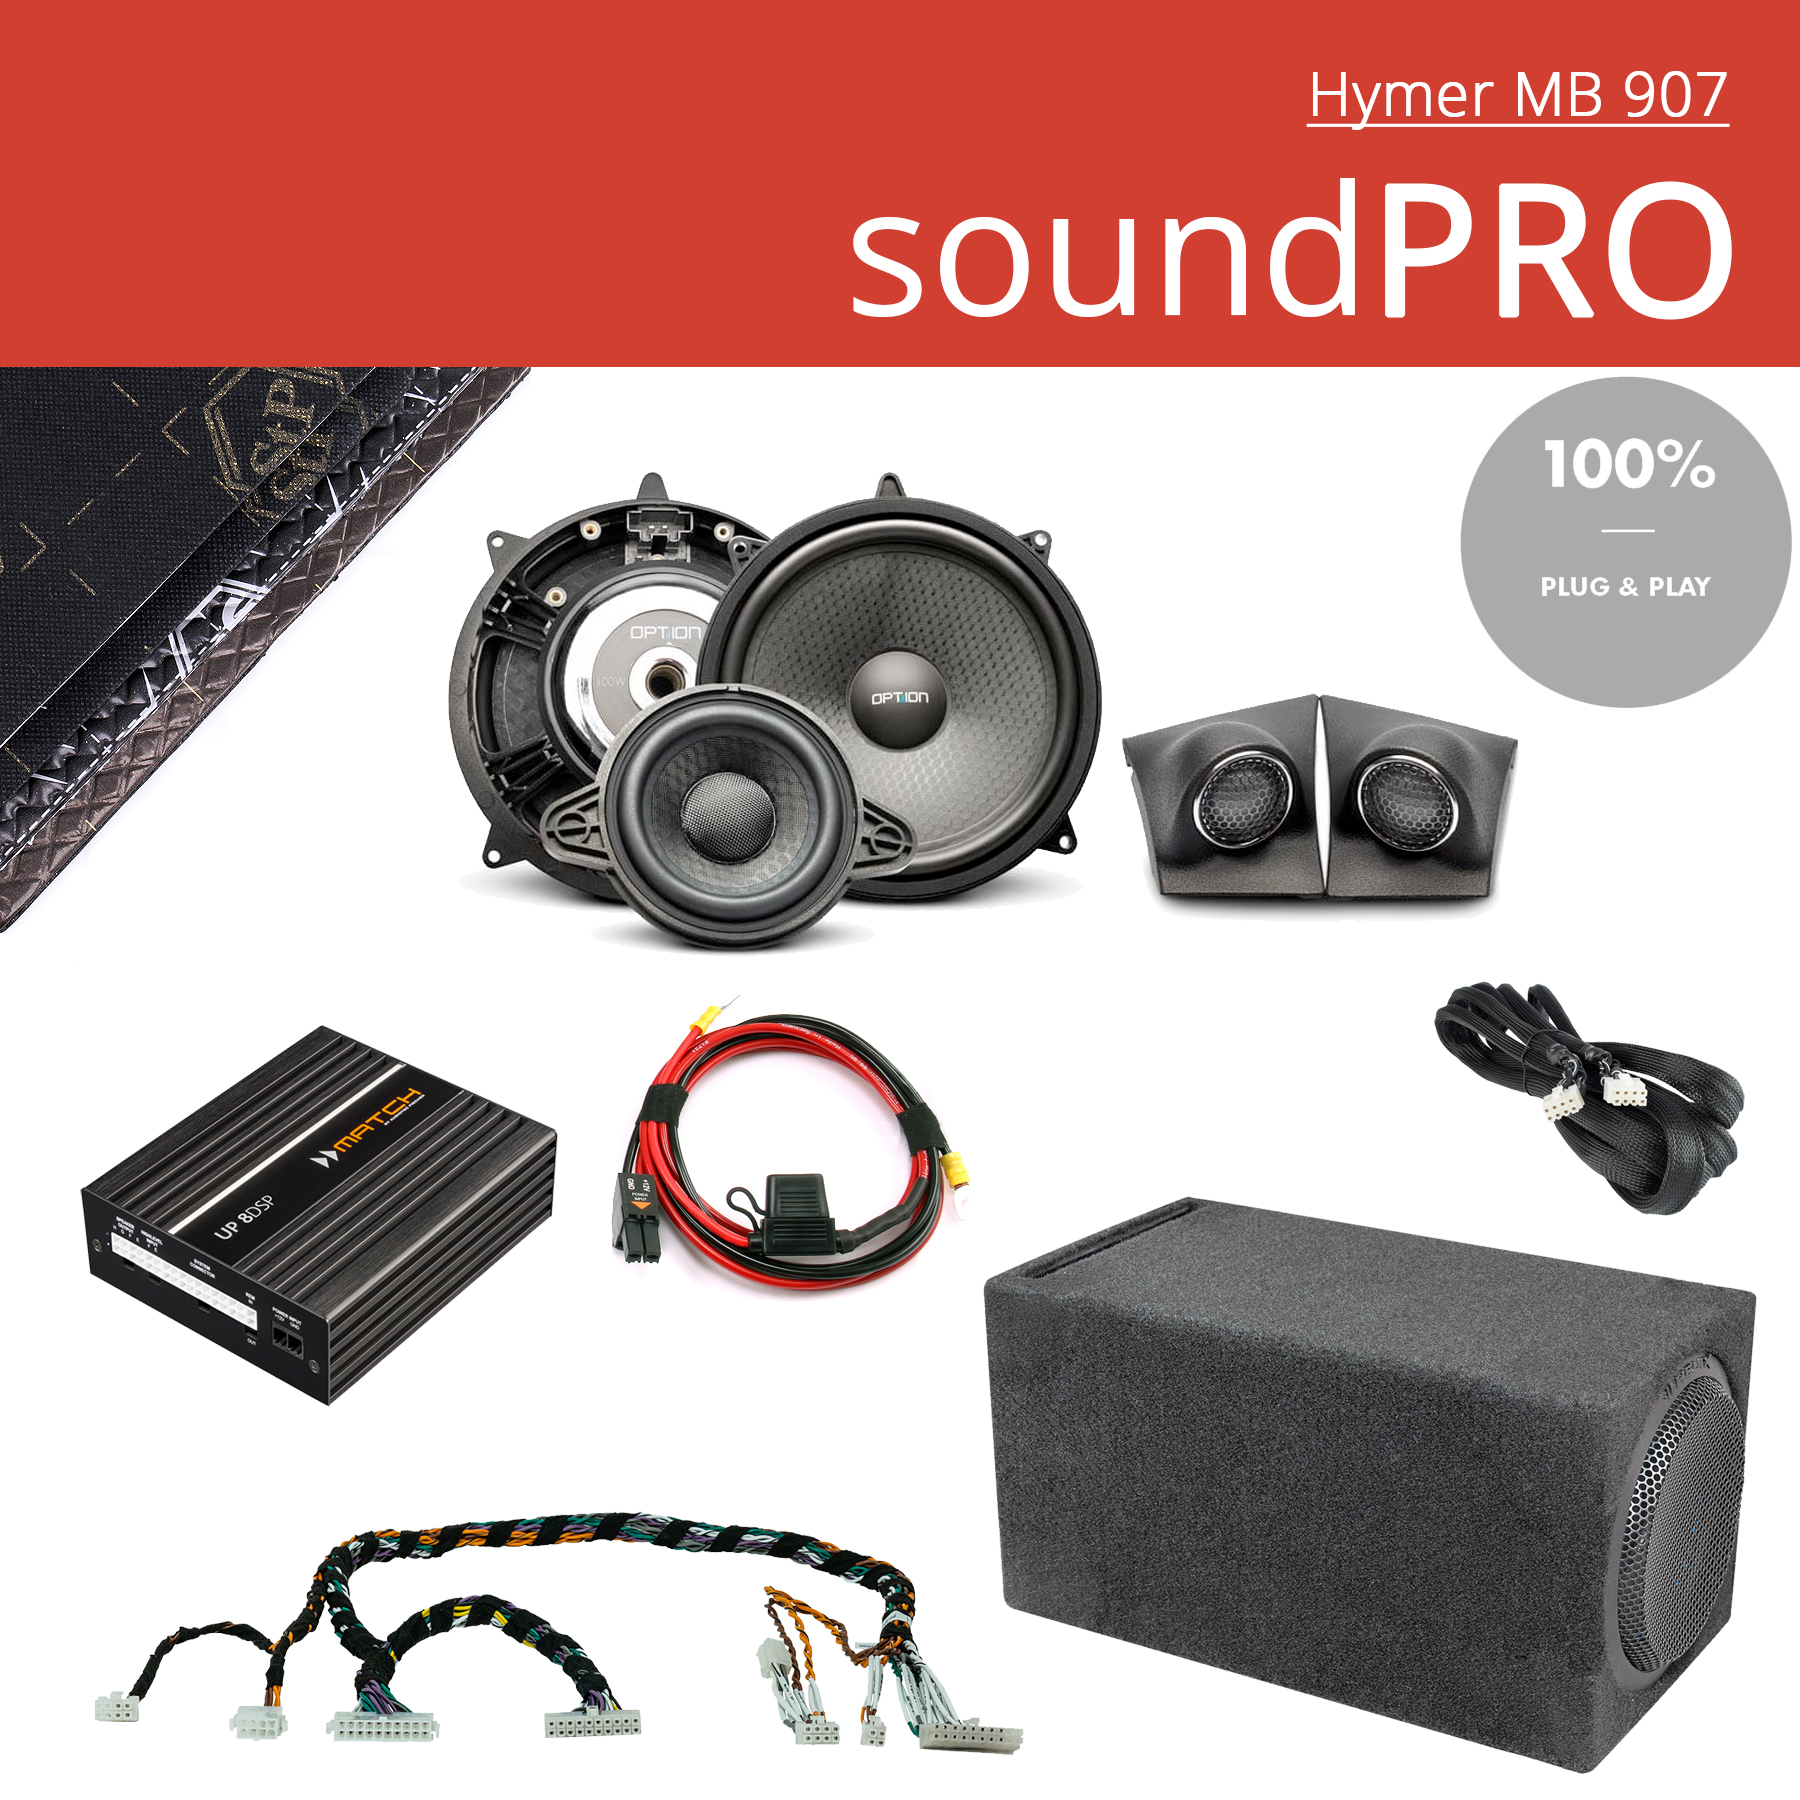 soundPRO MB 907 Hymer Caratec Upgrade